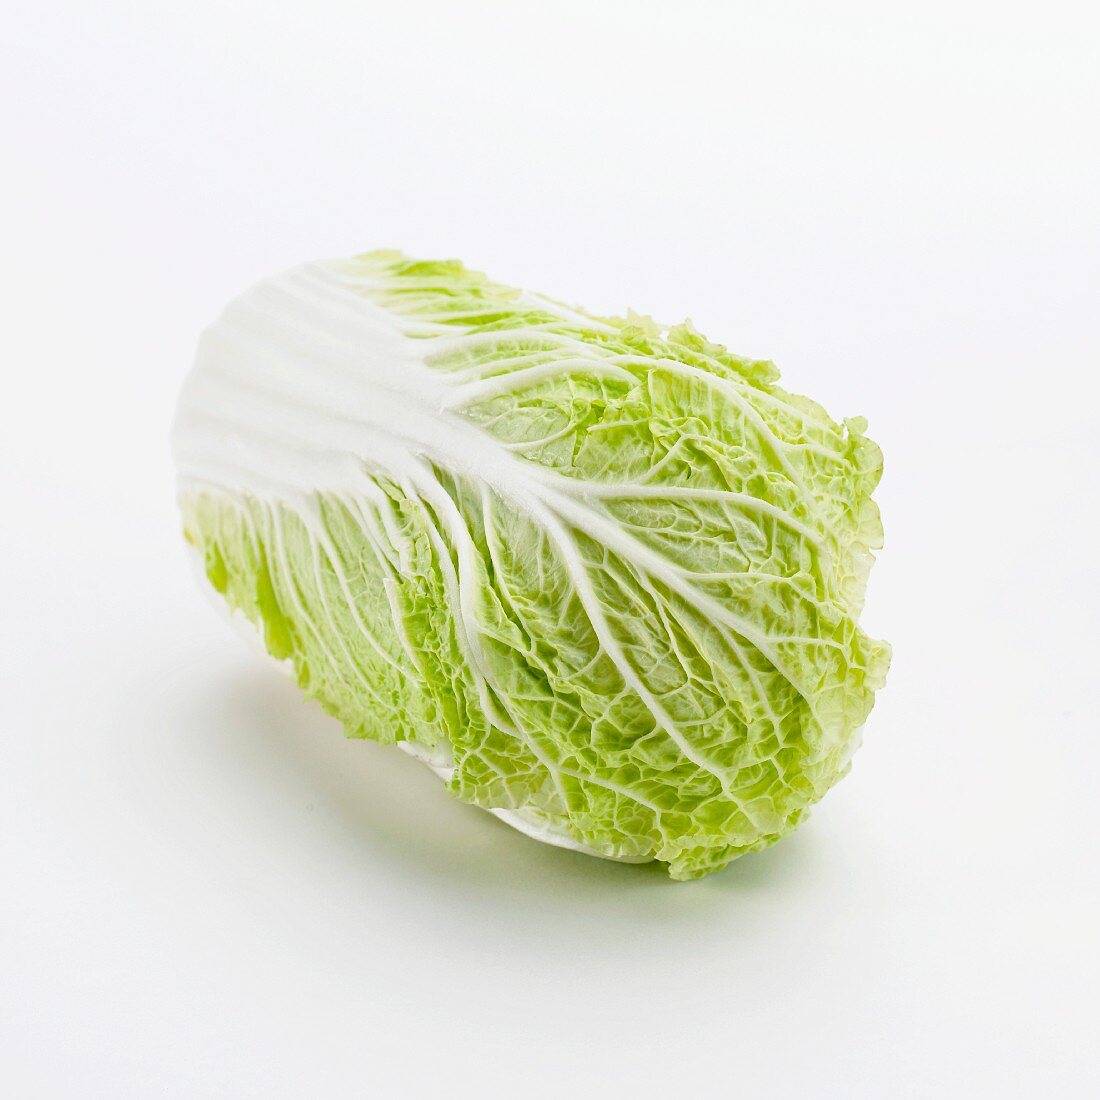 A Chinese cabbage (Brassica rapa var. chinensis)